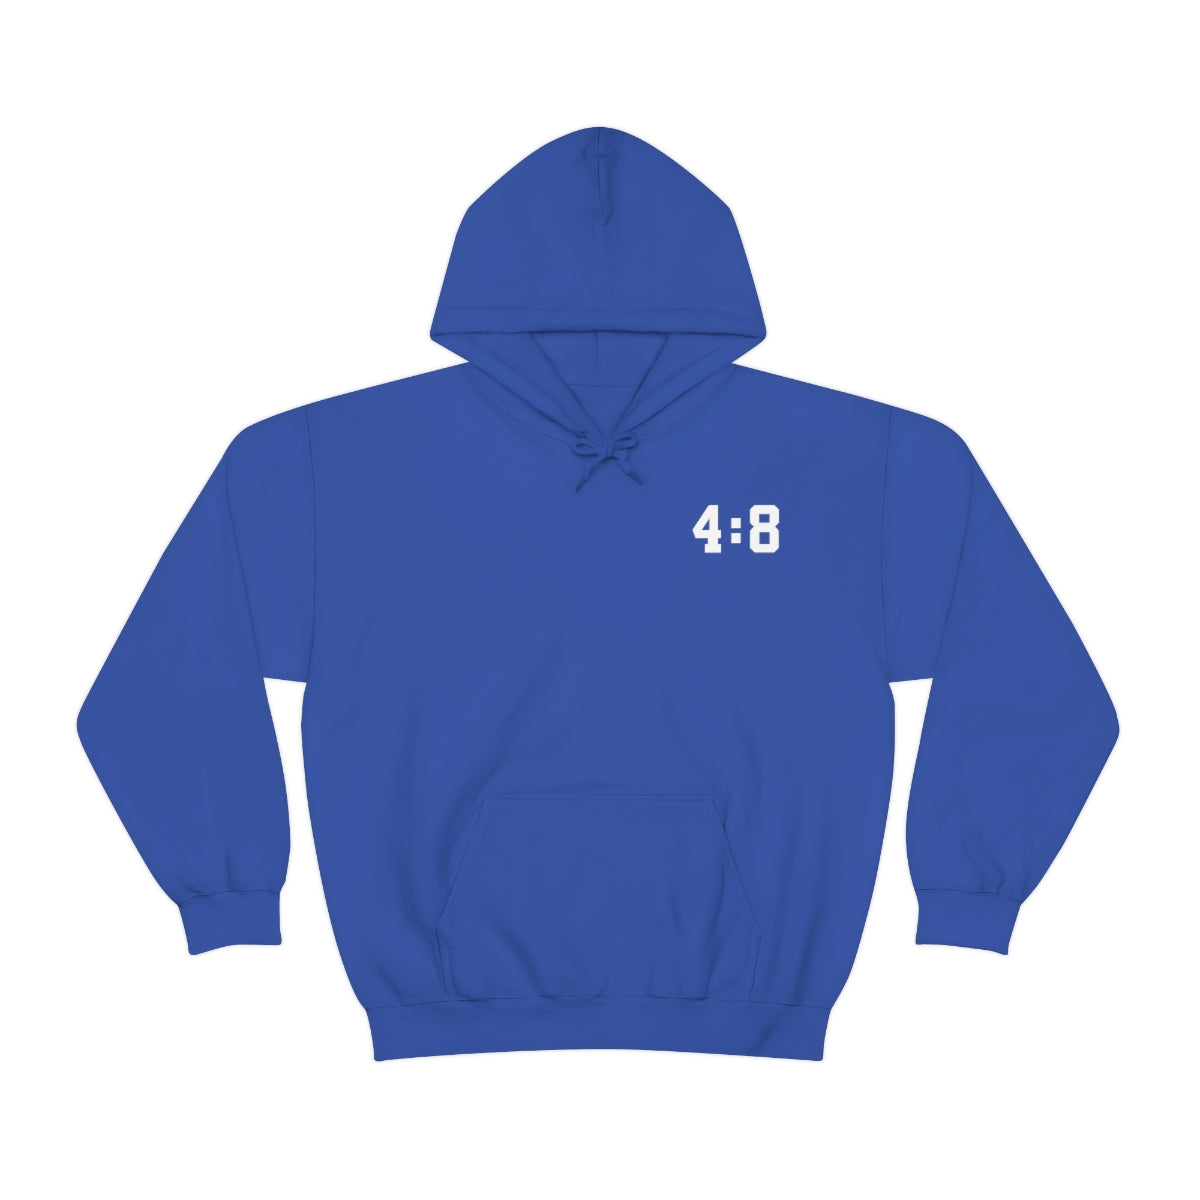 Braedon Lewis "BL" Double Sided Hoodie